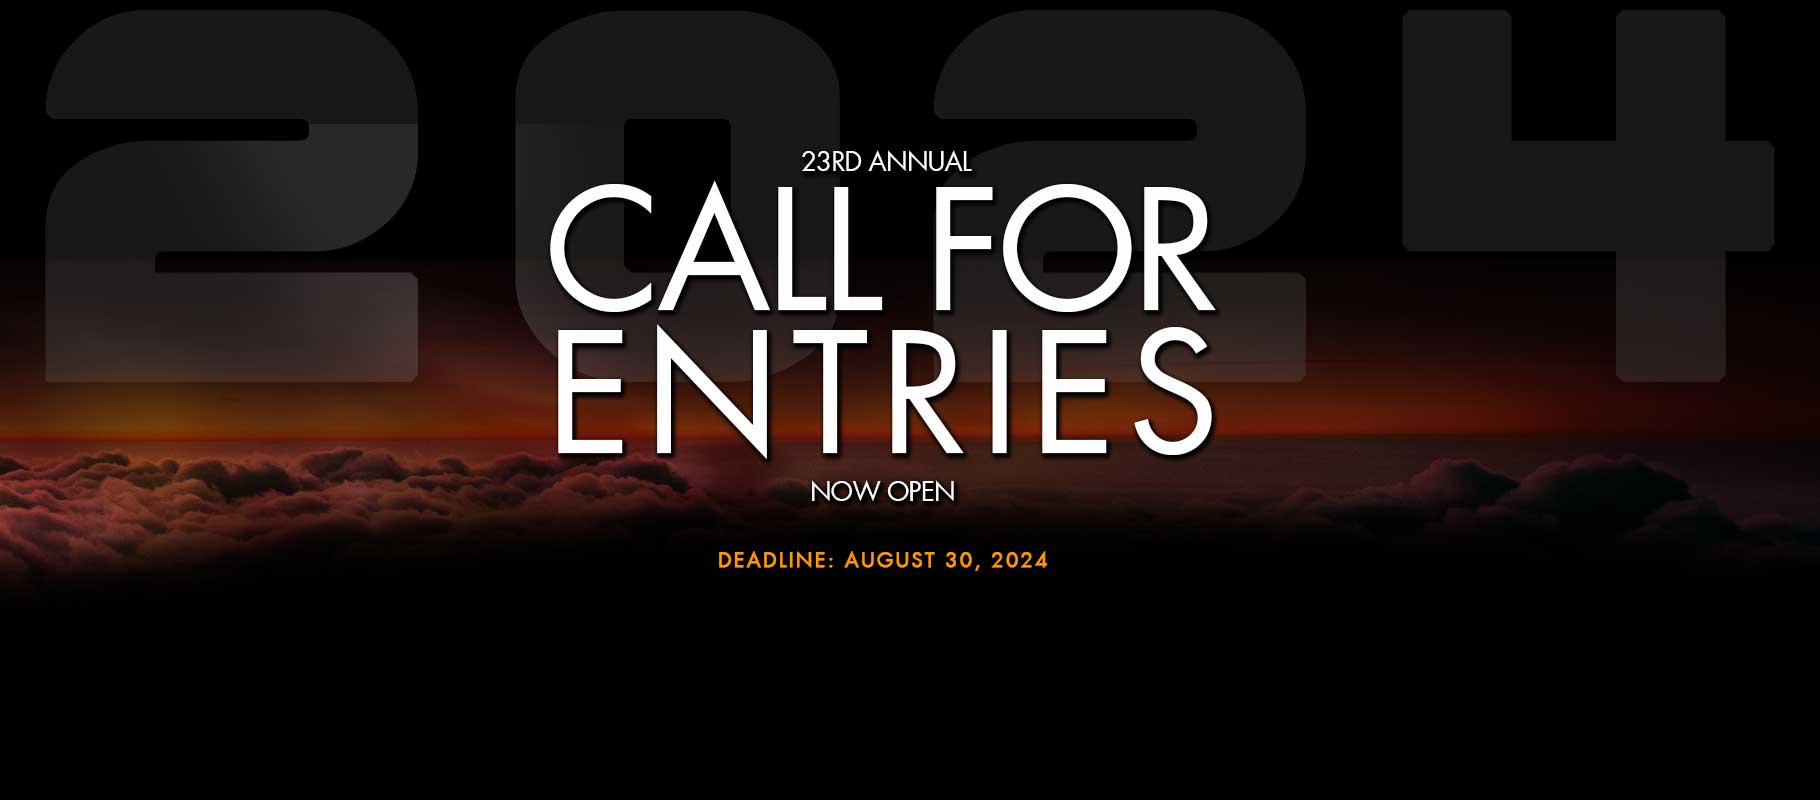 Enter the 2024 Web Design Awards Competition - Call for entries